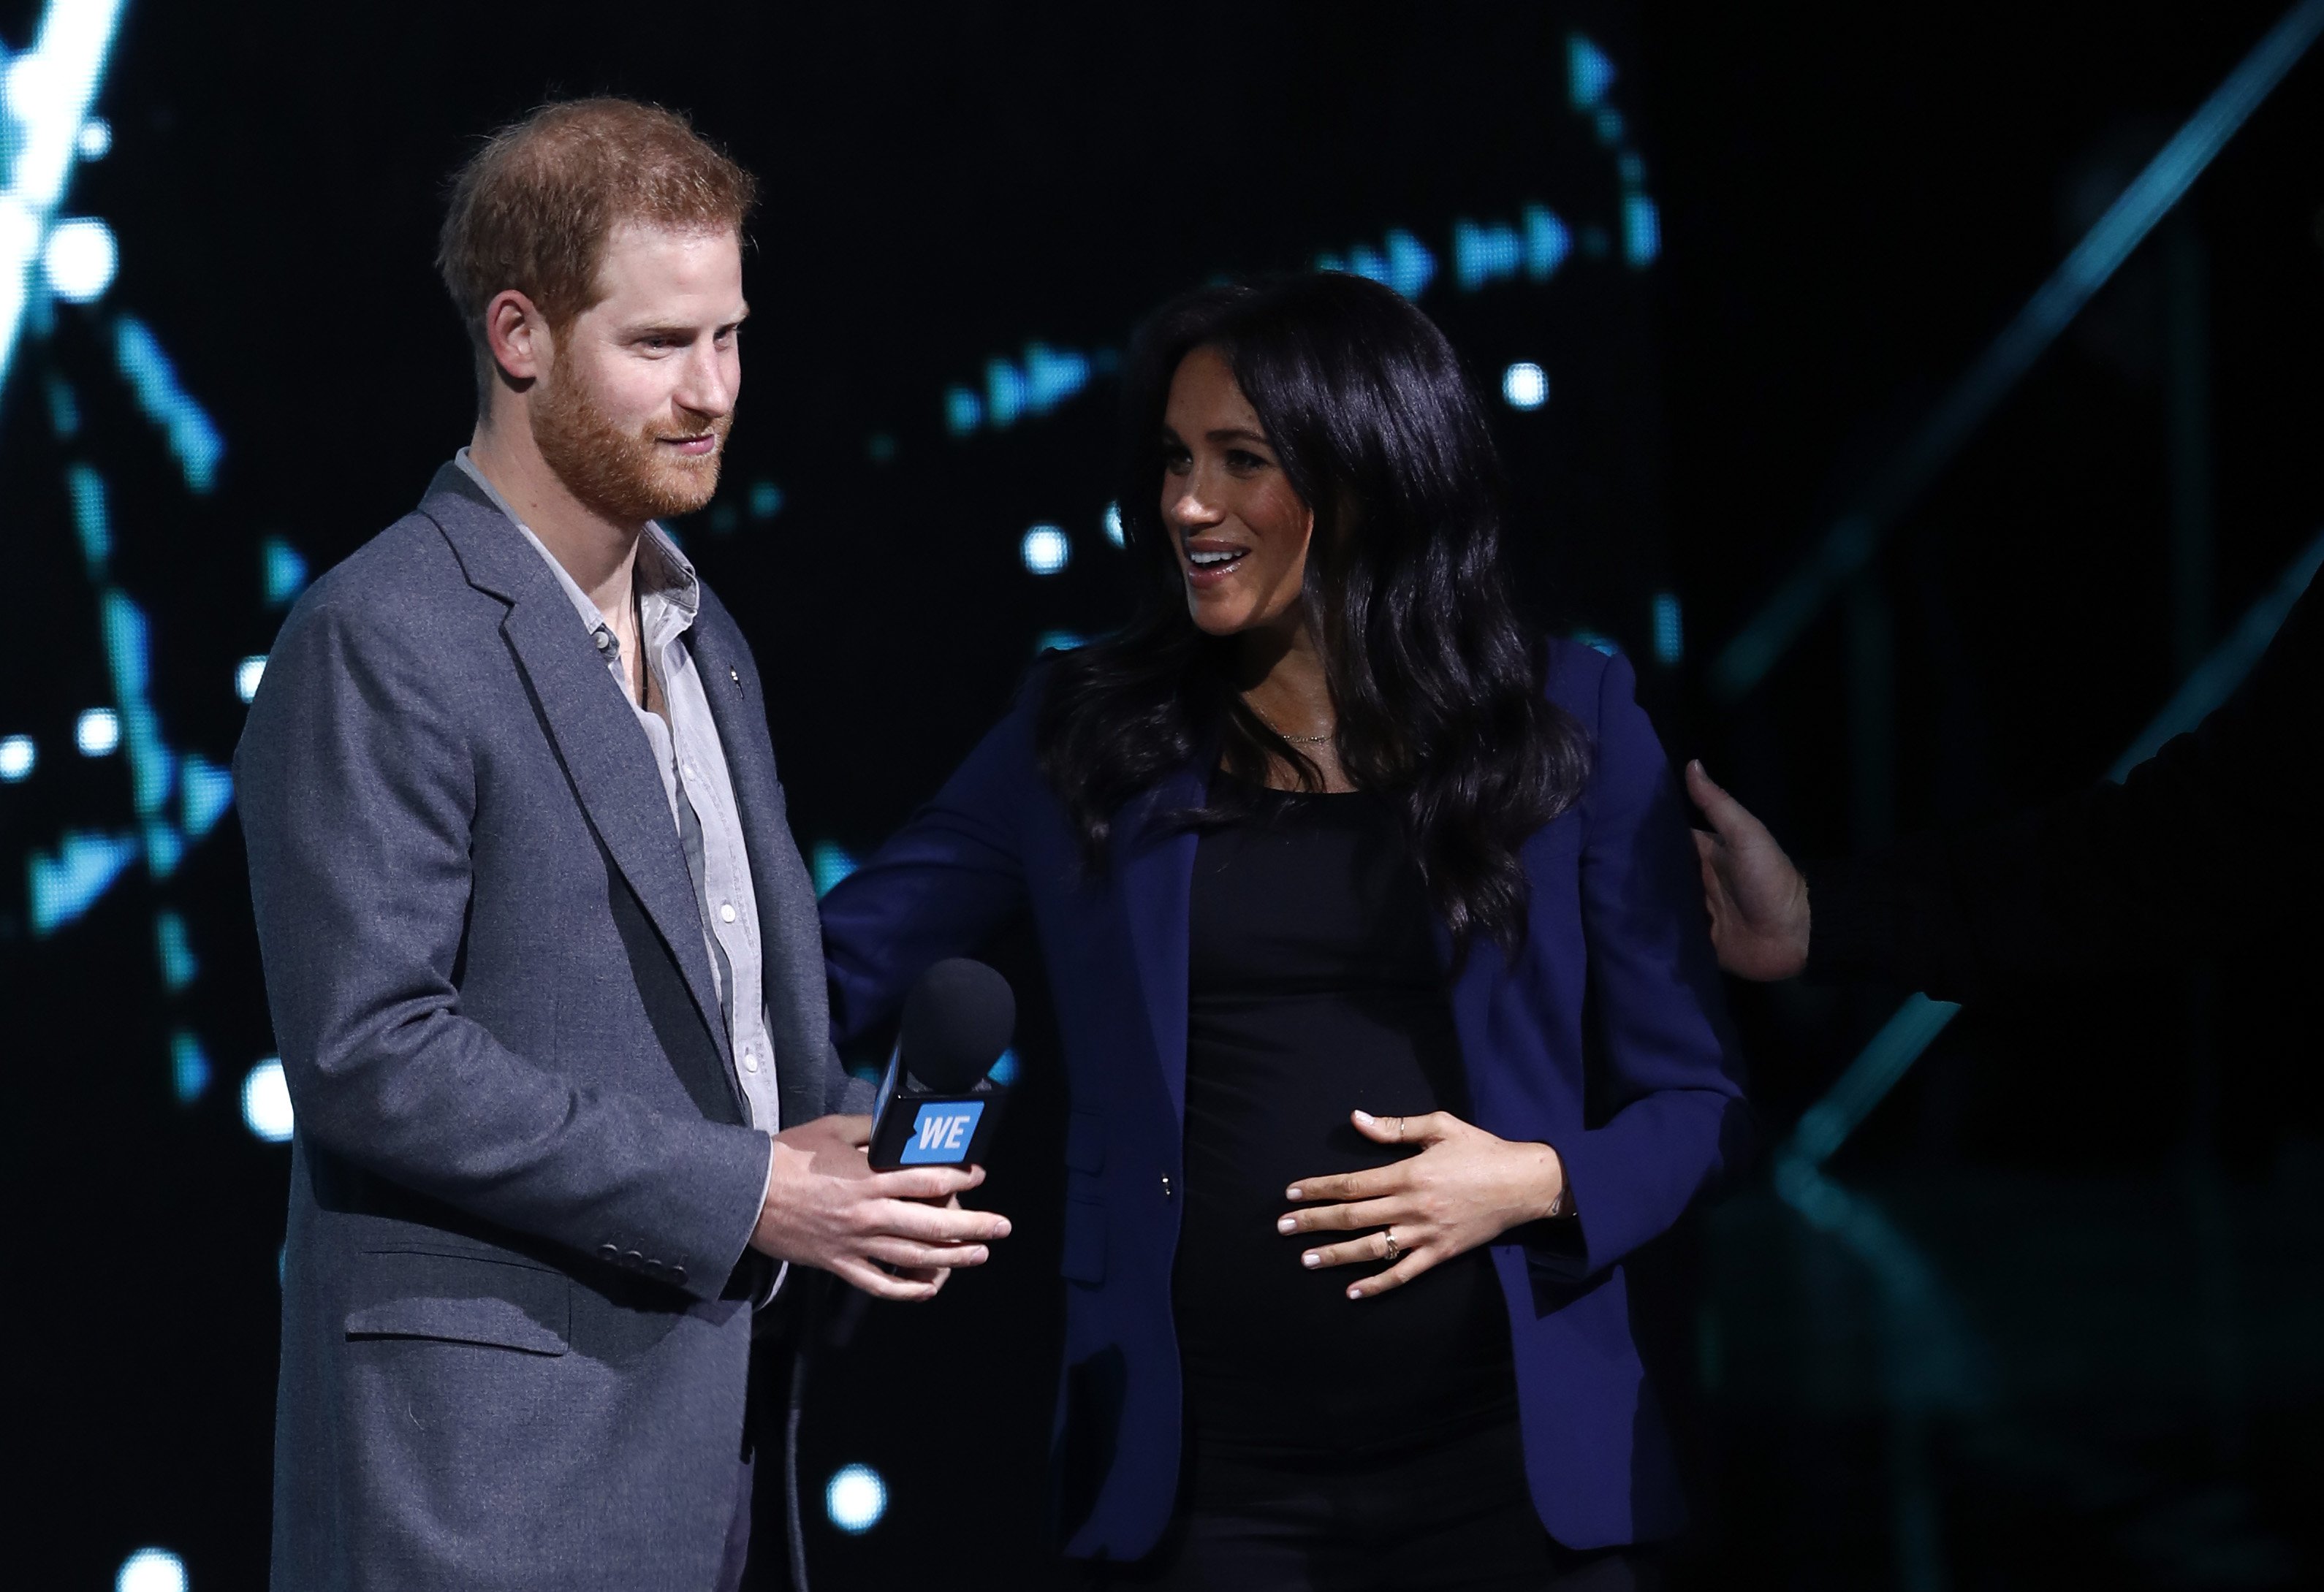 Prince Harry and Meghan Markle onstage at the WE Day UK event in March 2019 | Photo: Getty Images